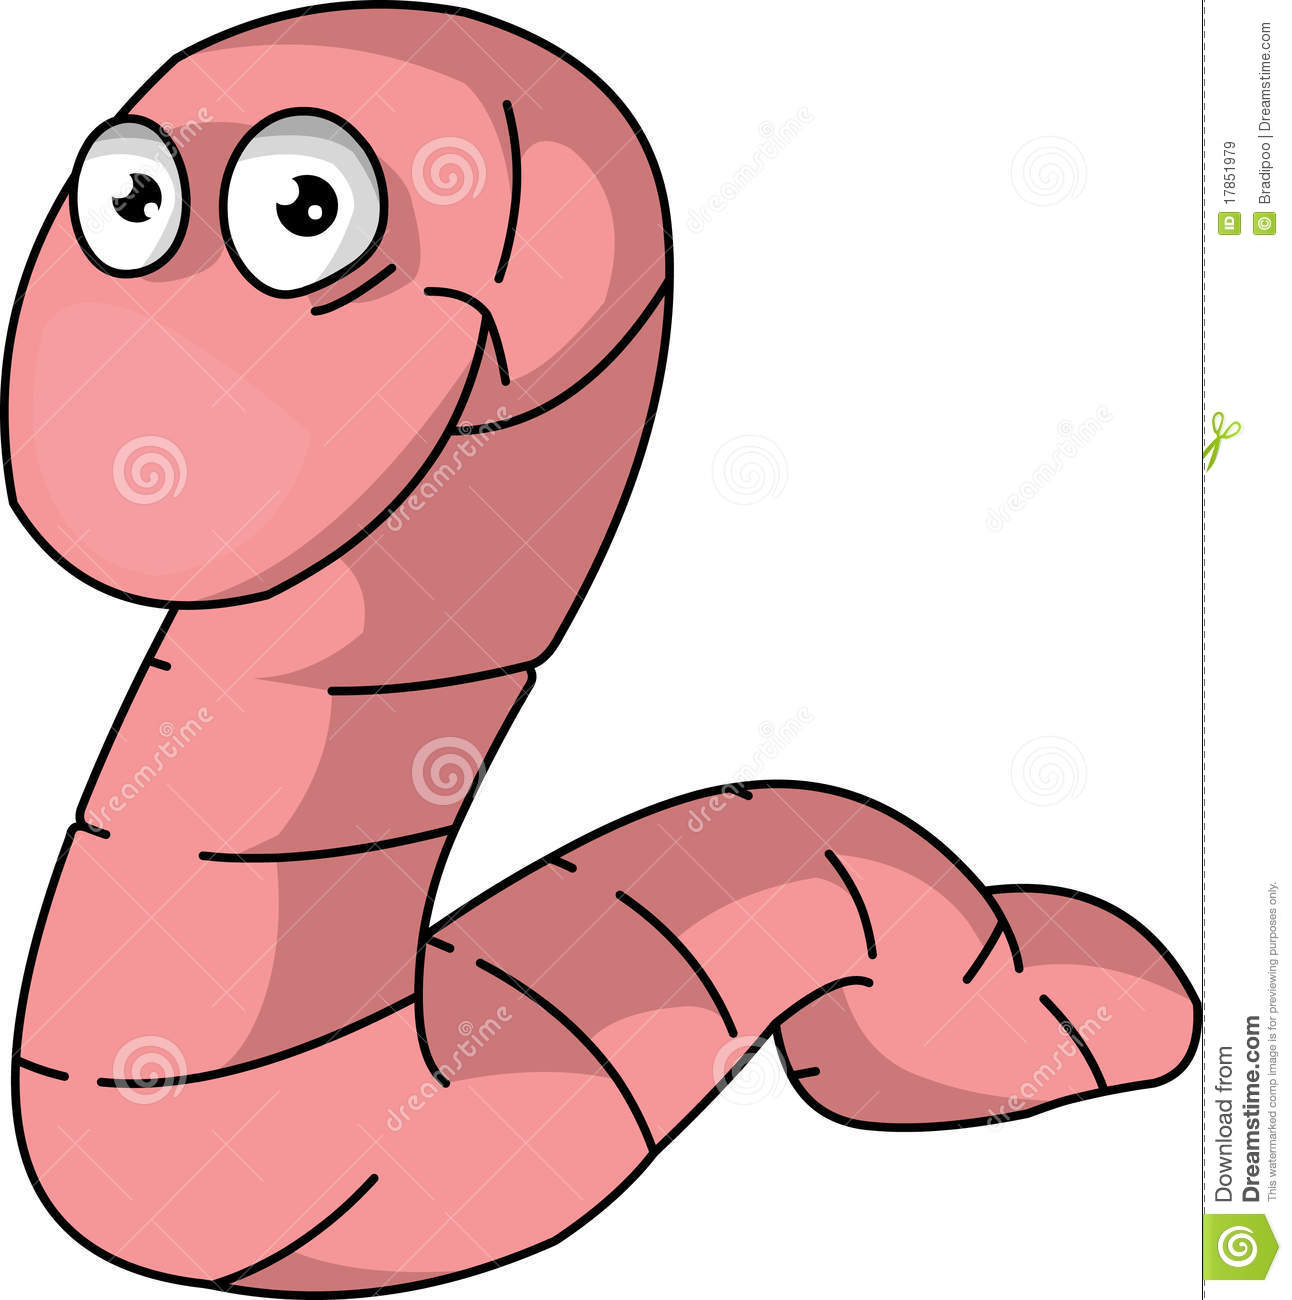 Funny Worm Royalty Free Stock Images   Image  17851979